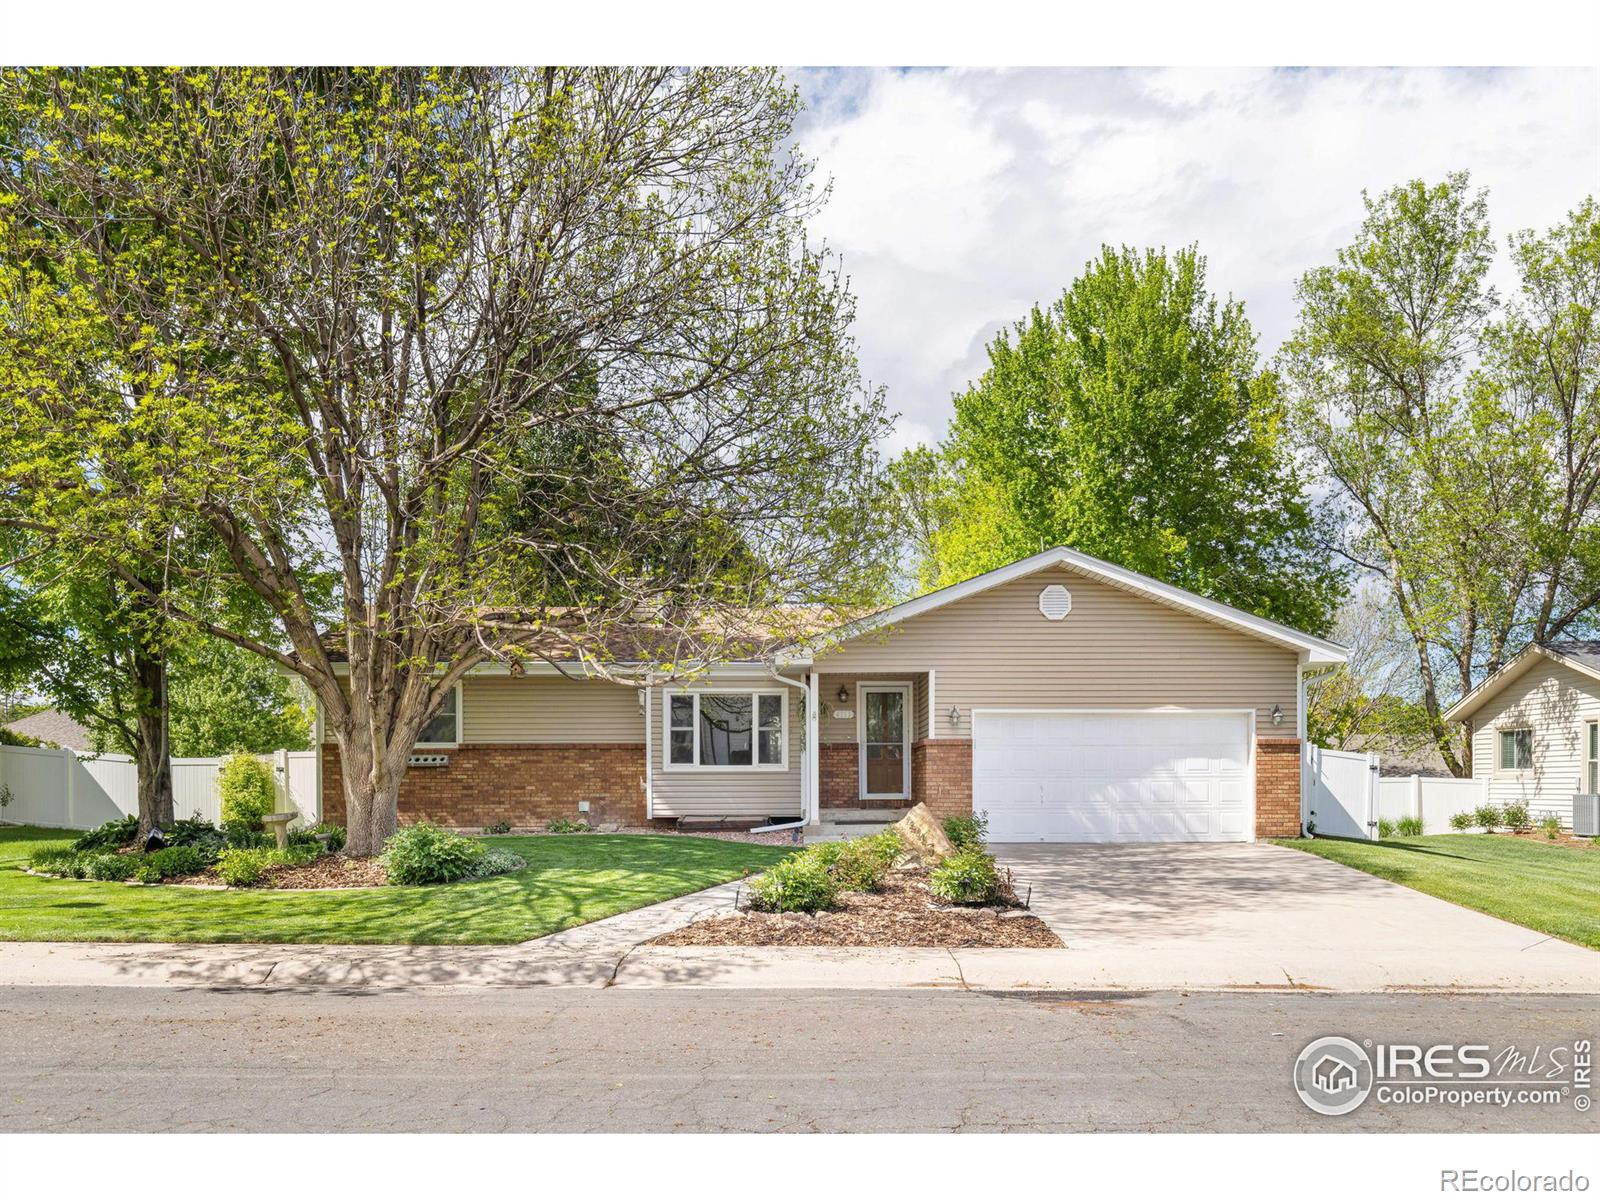 4113 W 16th St Rd, greeley MLS: 4567891009229 Beds: 4 Baths: 3 Price: $479,900